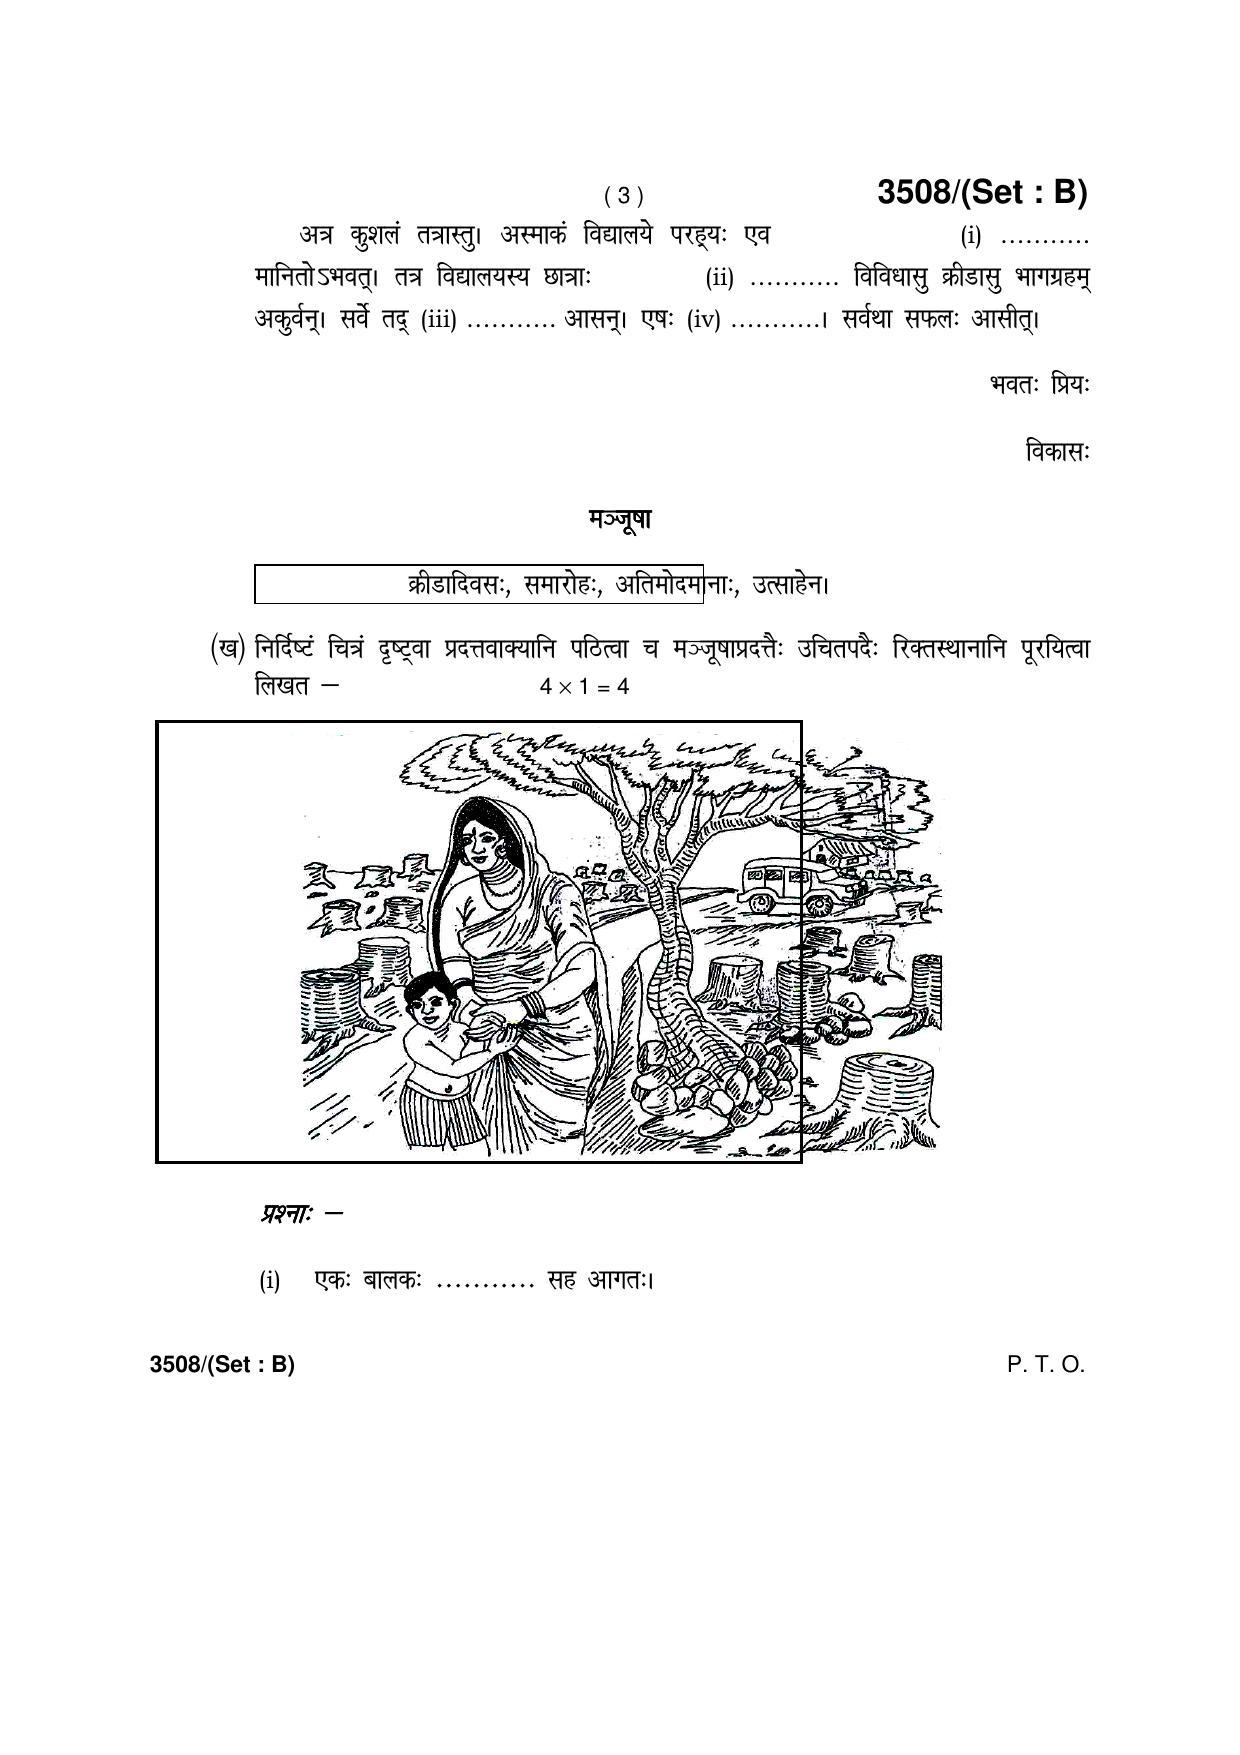 Haryana Board HBSE Class 10 Sanskrit -B 2018 Question Paper - Page 3